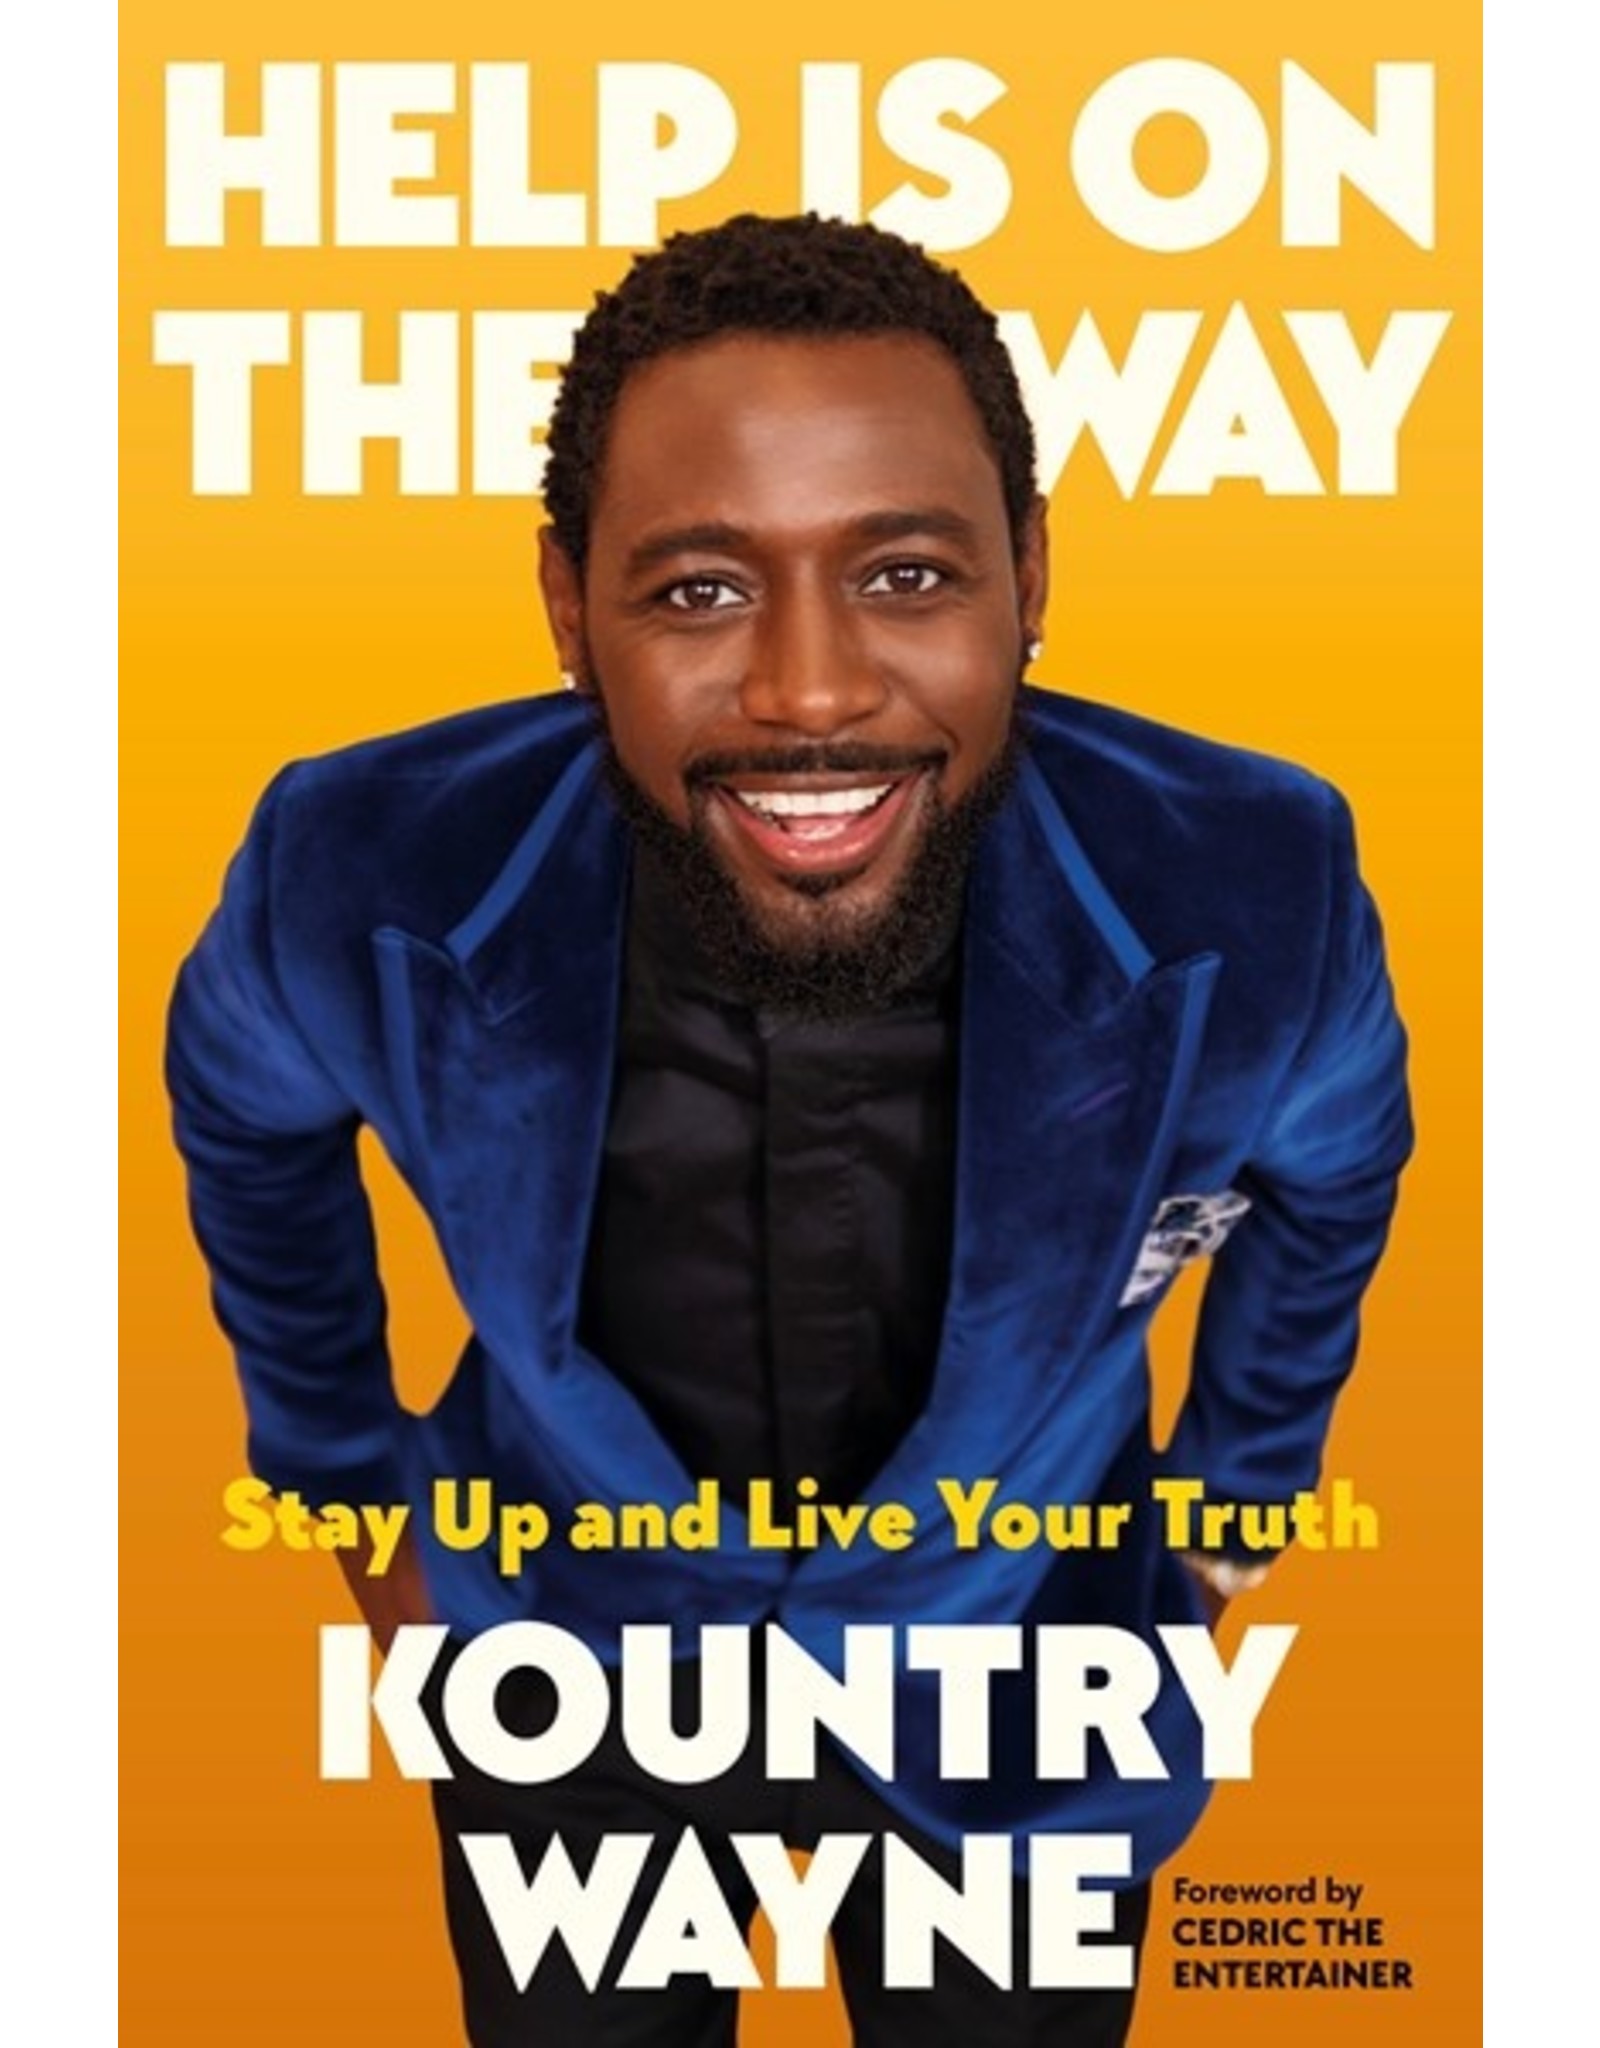 Books Help is on the Way by Kountry Wayne